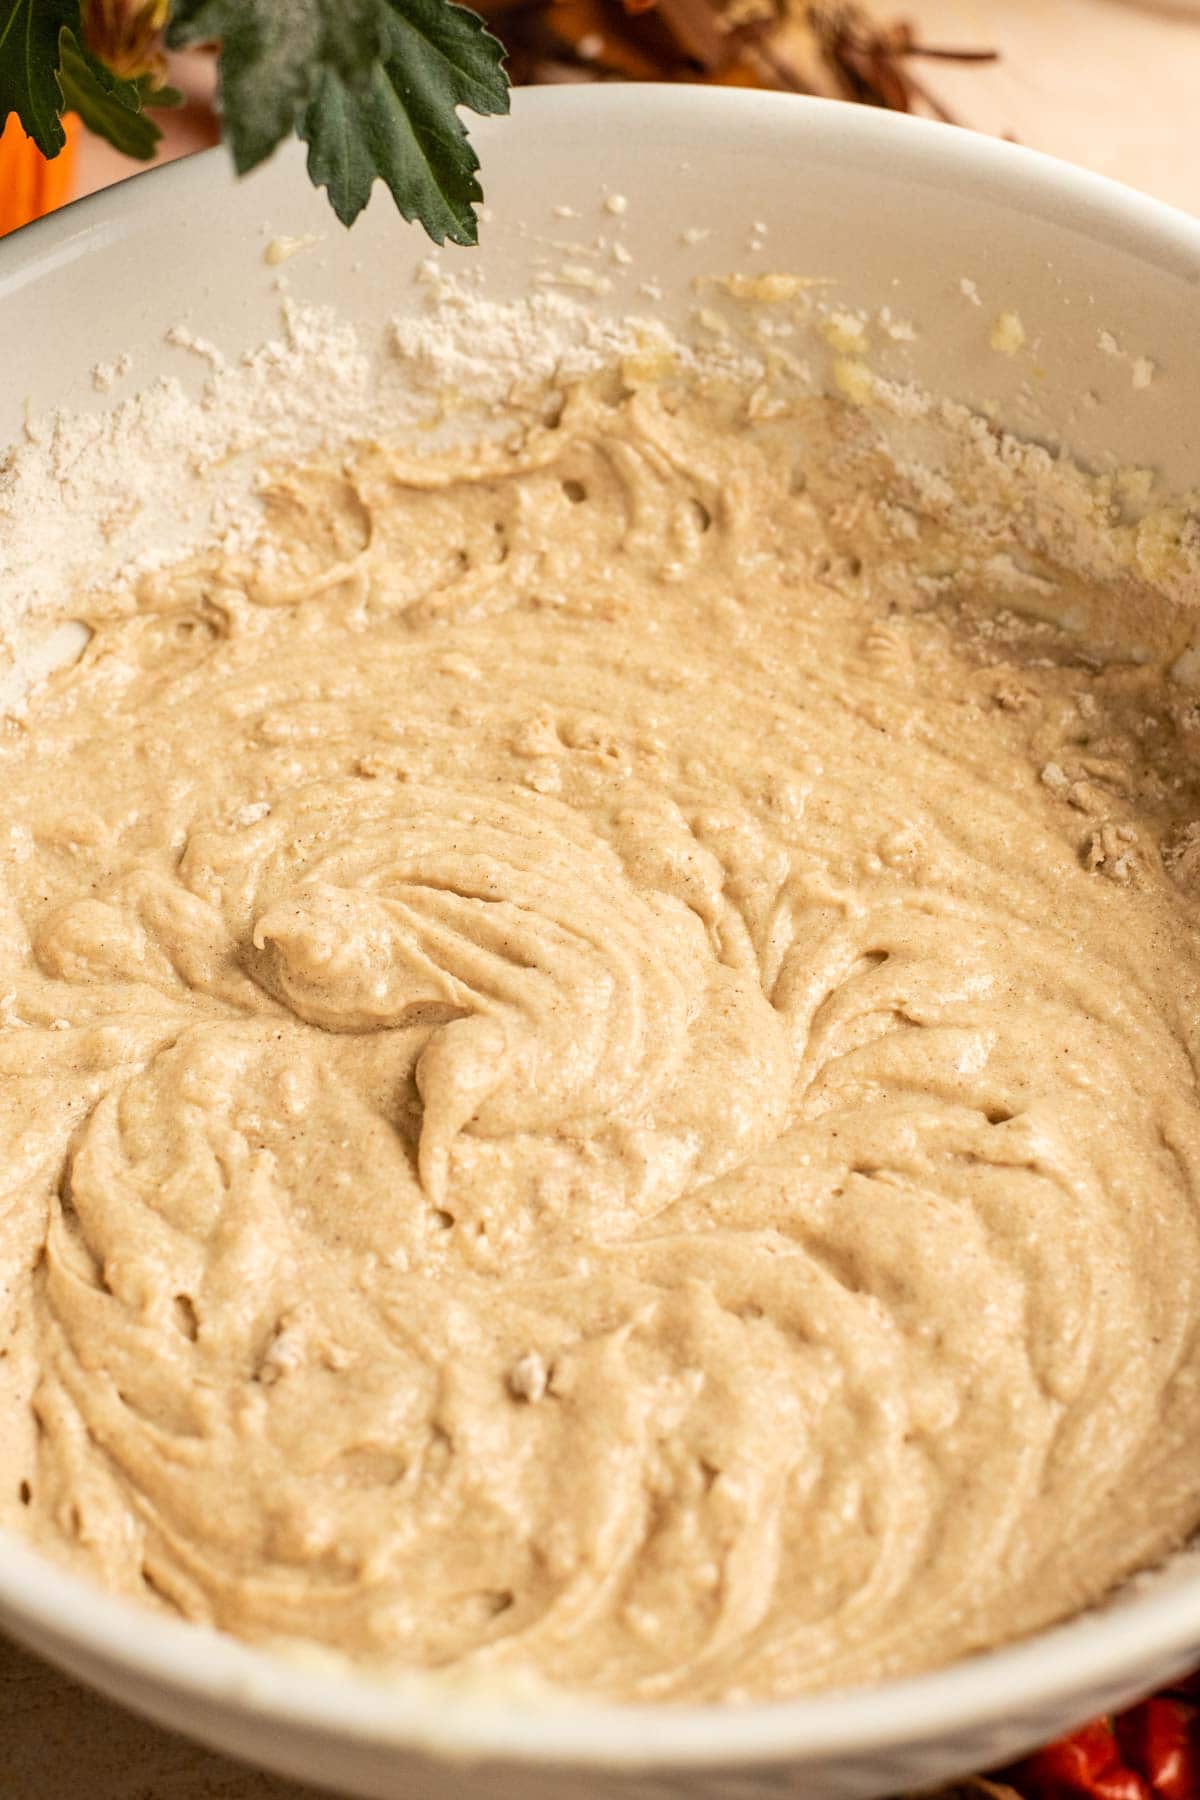 The mixed batter in a large mixing bowl.